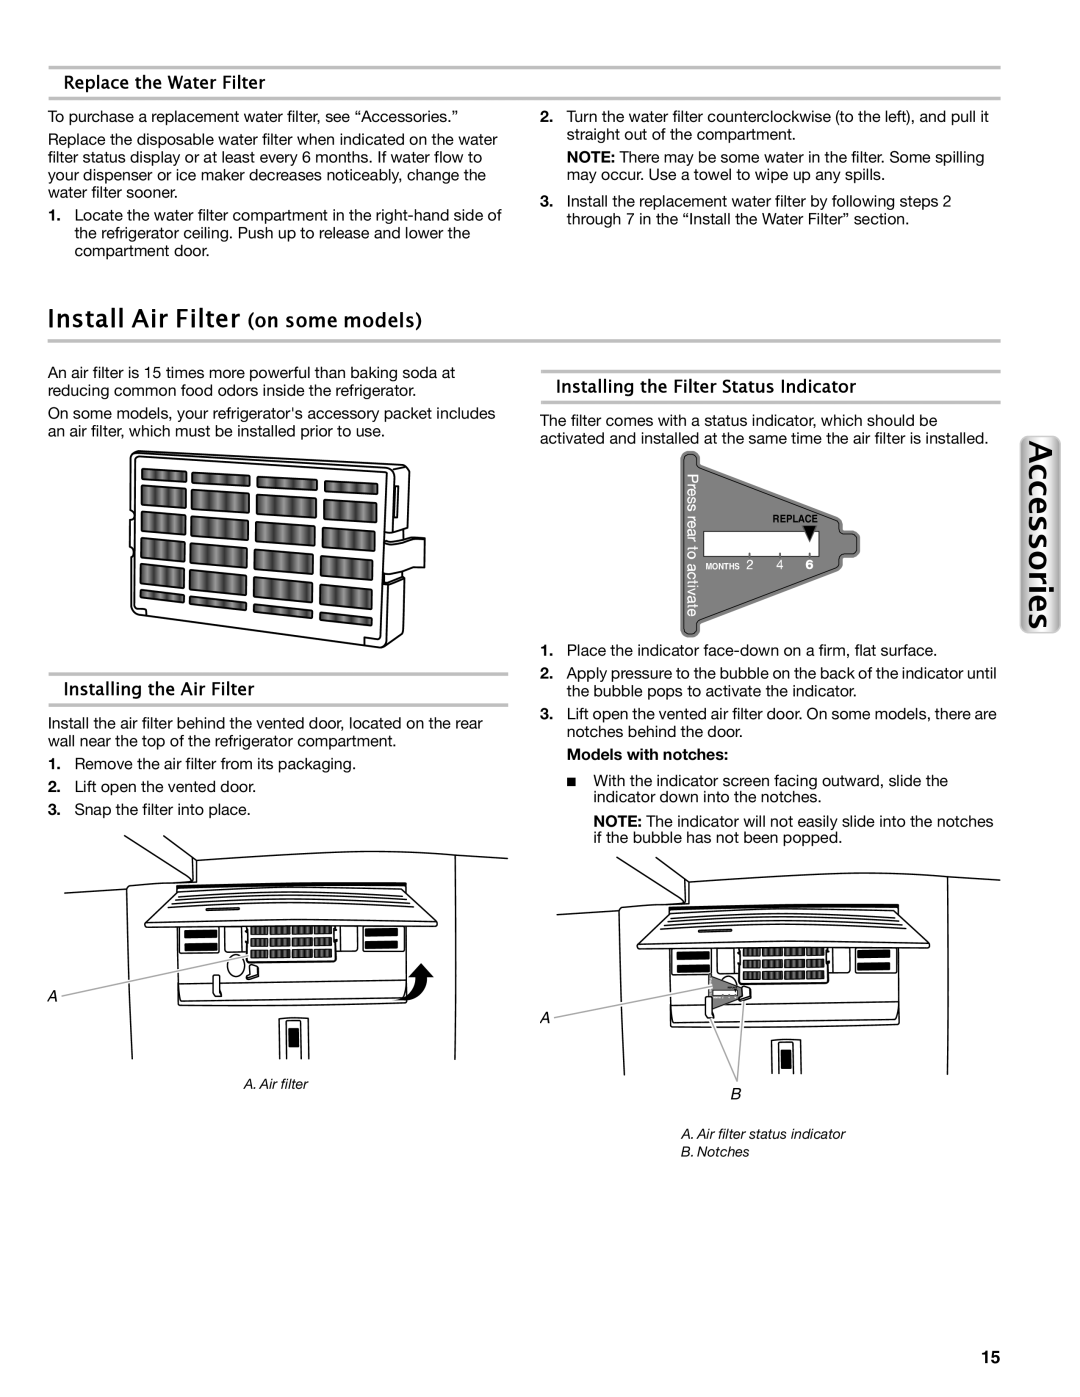 Maytag W10558103A manual Install Air Filter on some models, Replace the Water Filter, Installing the Air Filter 